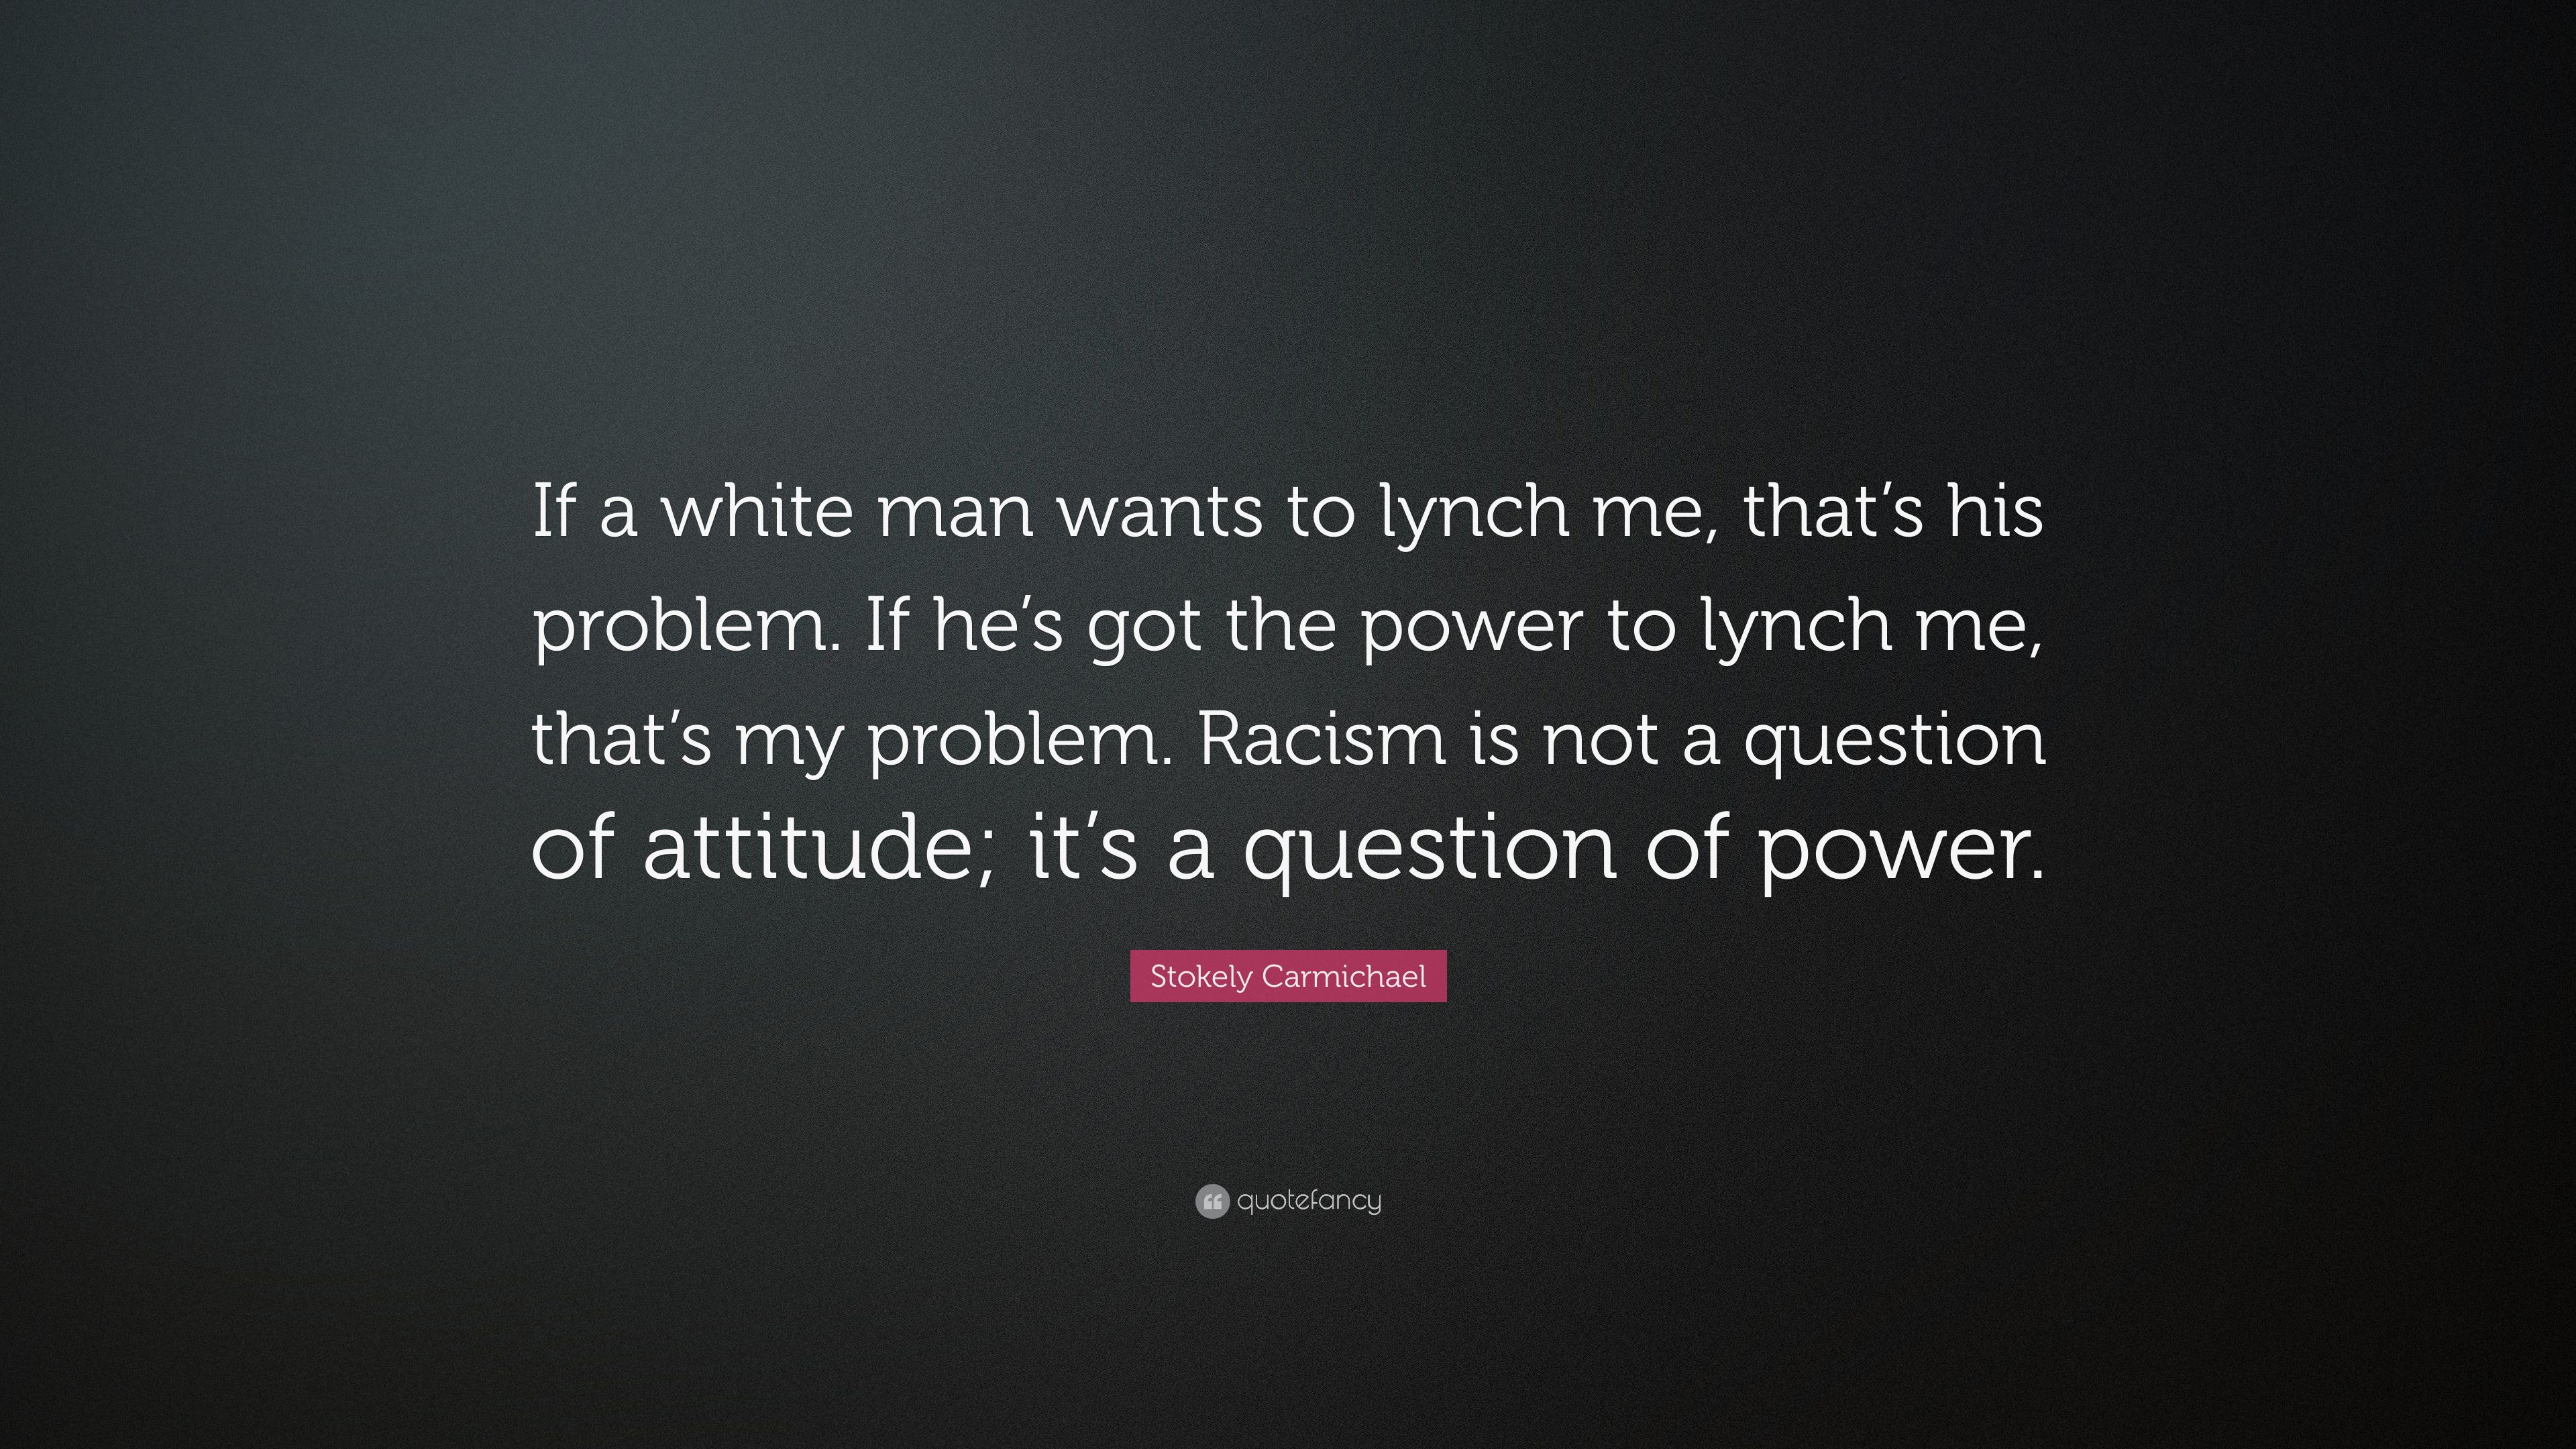 Stokely Carmichael Quote: “If a white man wants to lynch me